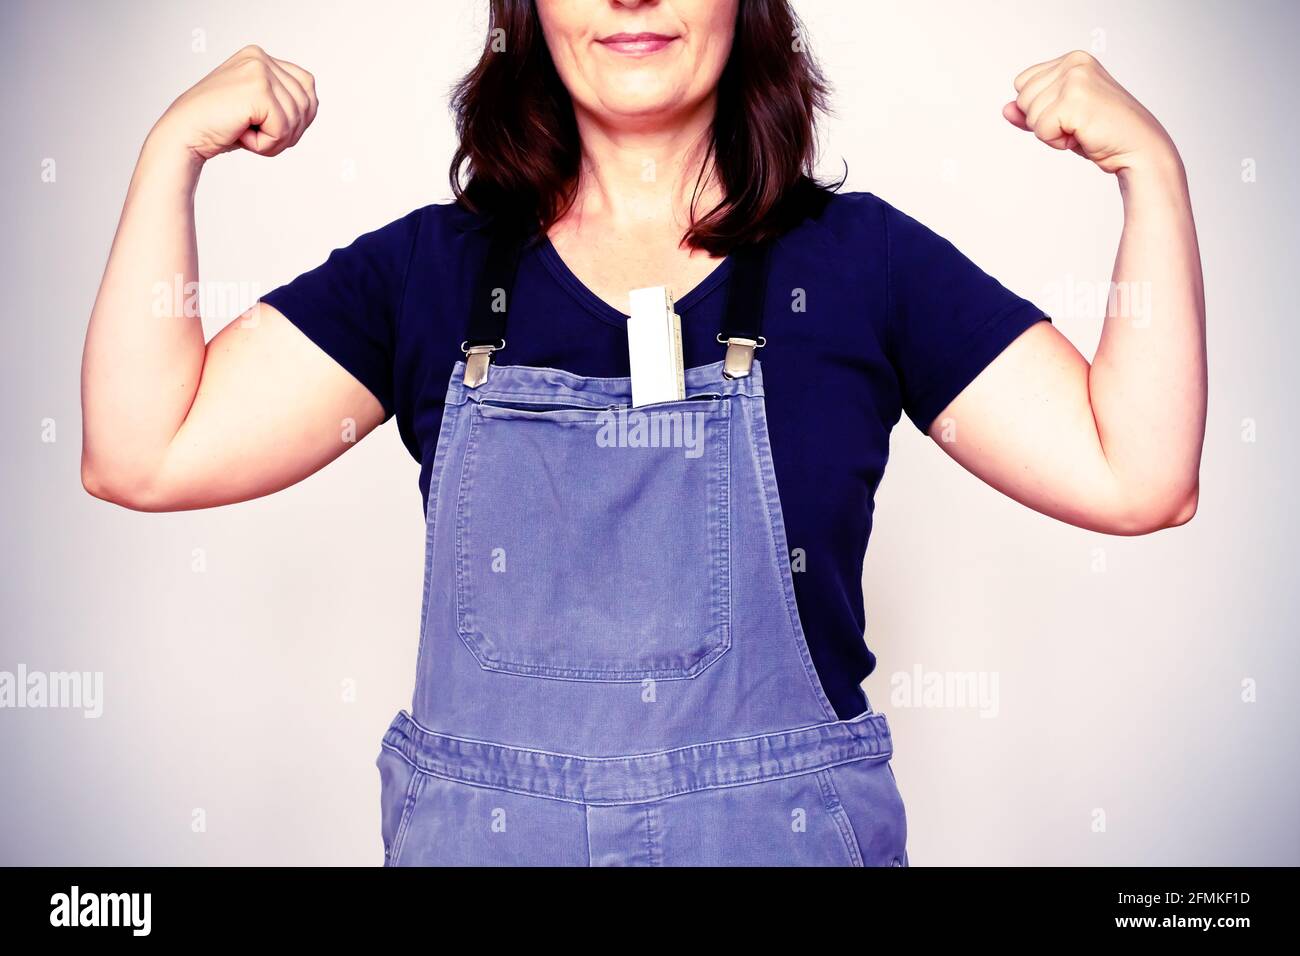 Self-confident woman in dungarees or bip trousers with a folding rule flexing her biceps muscles, filter effect. Stock Photo